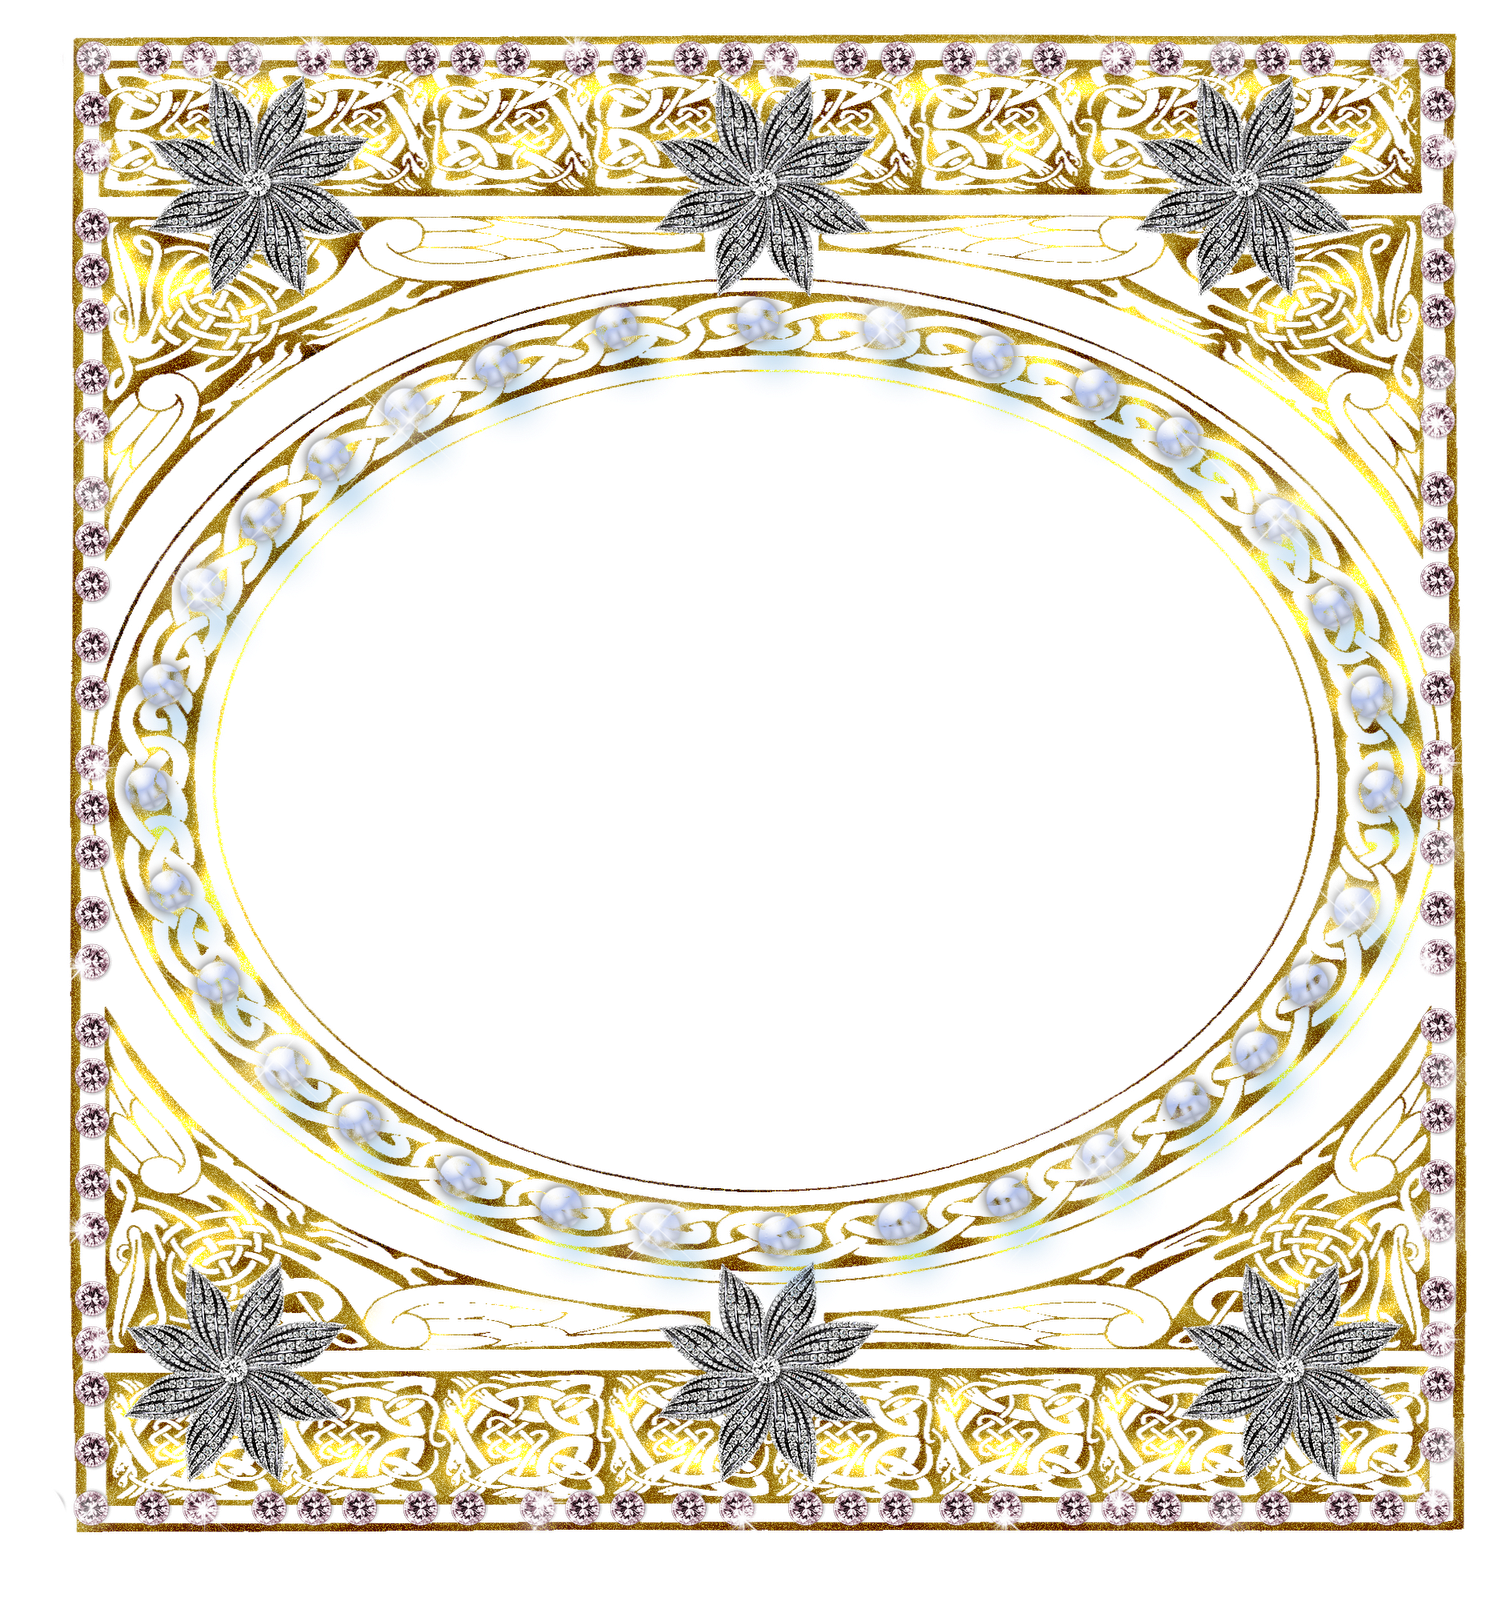 A Gold Frame With Diamonds And Flowers